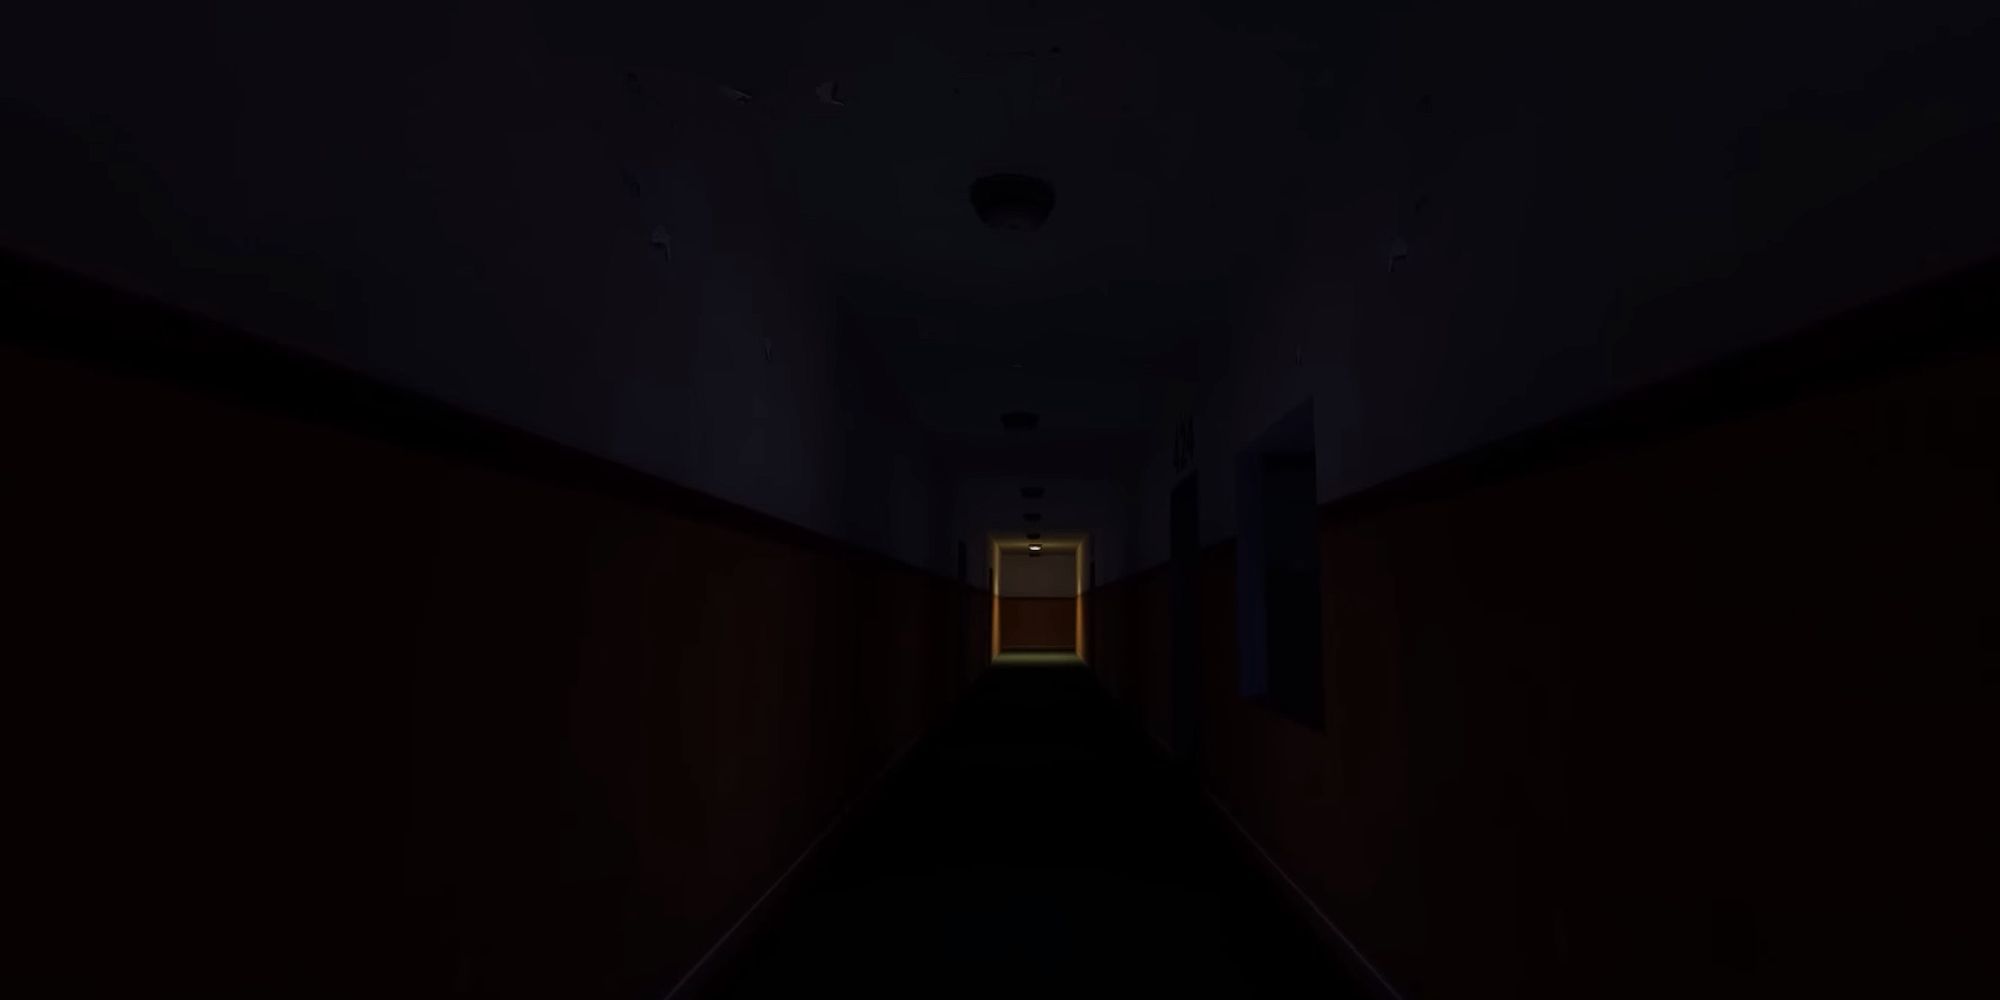 A single light burns at the end of a long, dark hallway